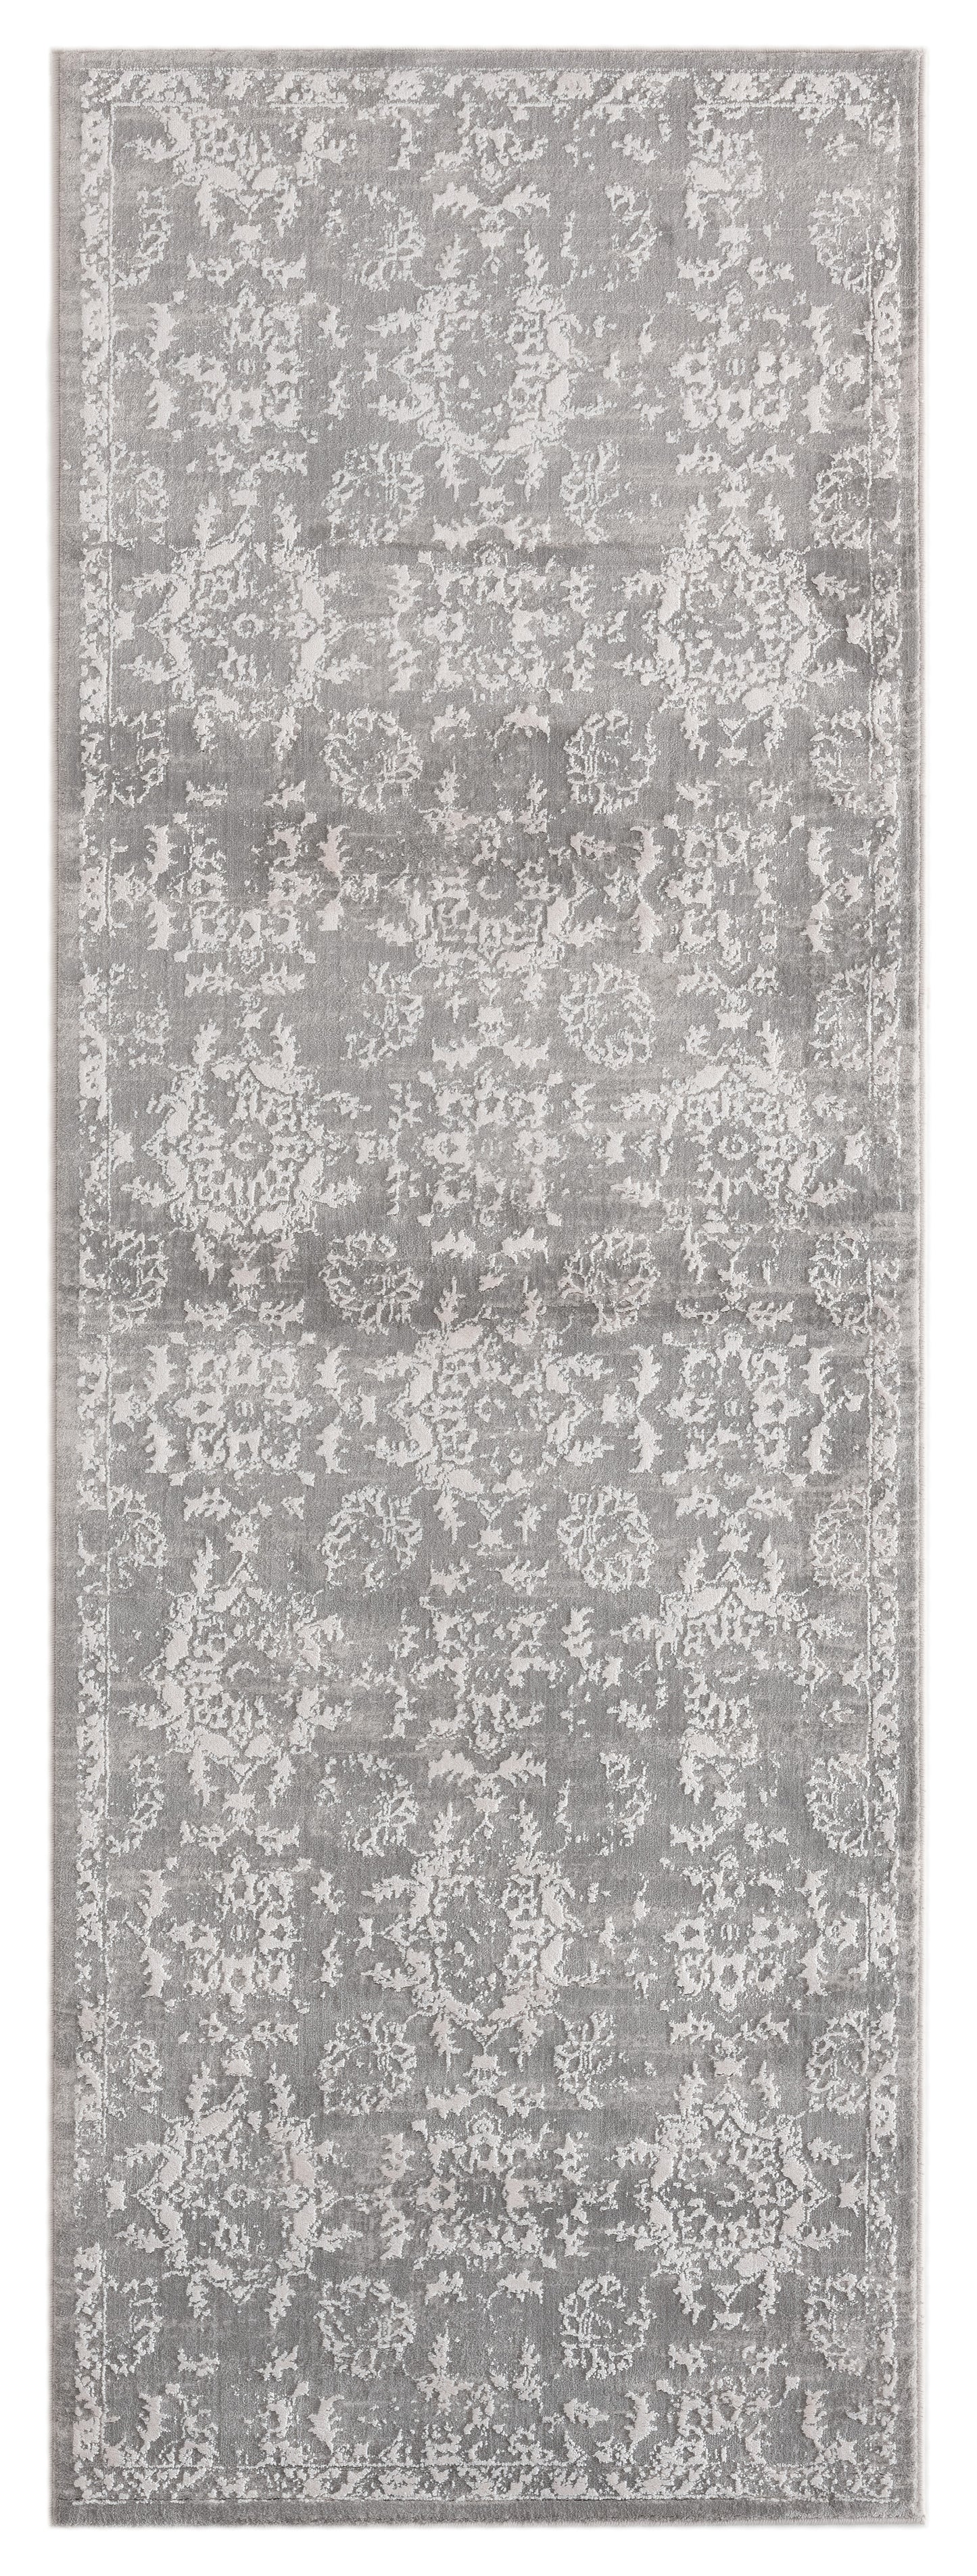 4520-Orchard Synthetic Blend Indoor Area Rug by United Weavers